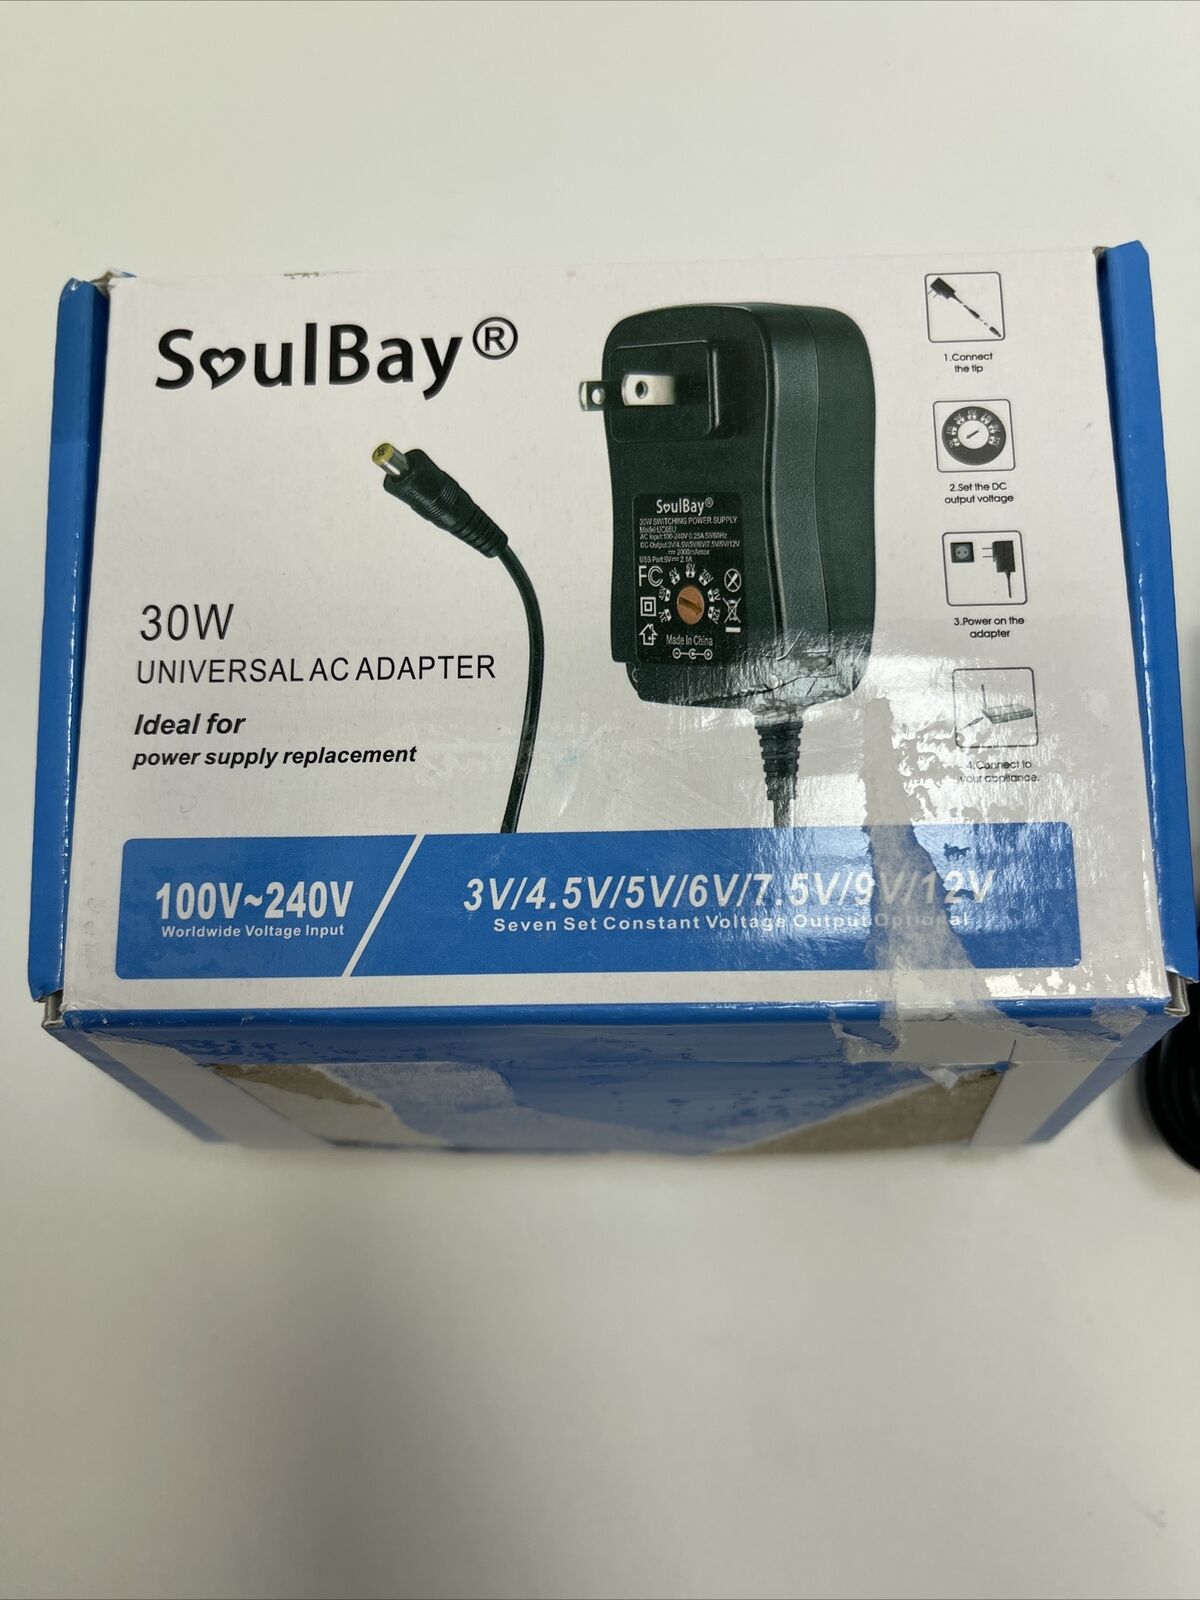 SoulBay 30W Universal AC/DC Adapter Switching Power Supply with 8 adapter tips